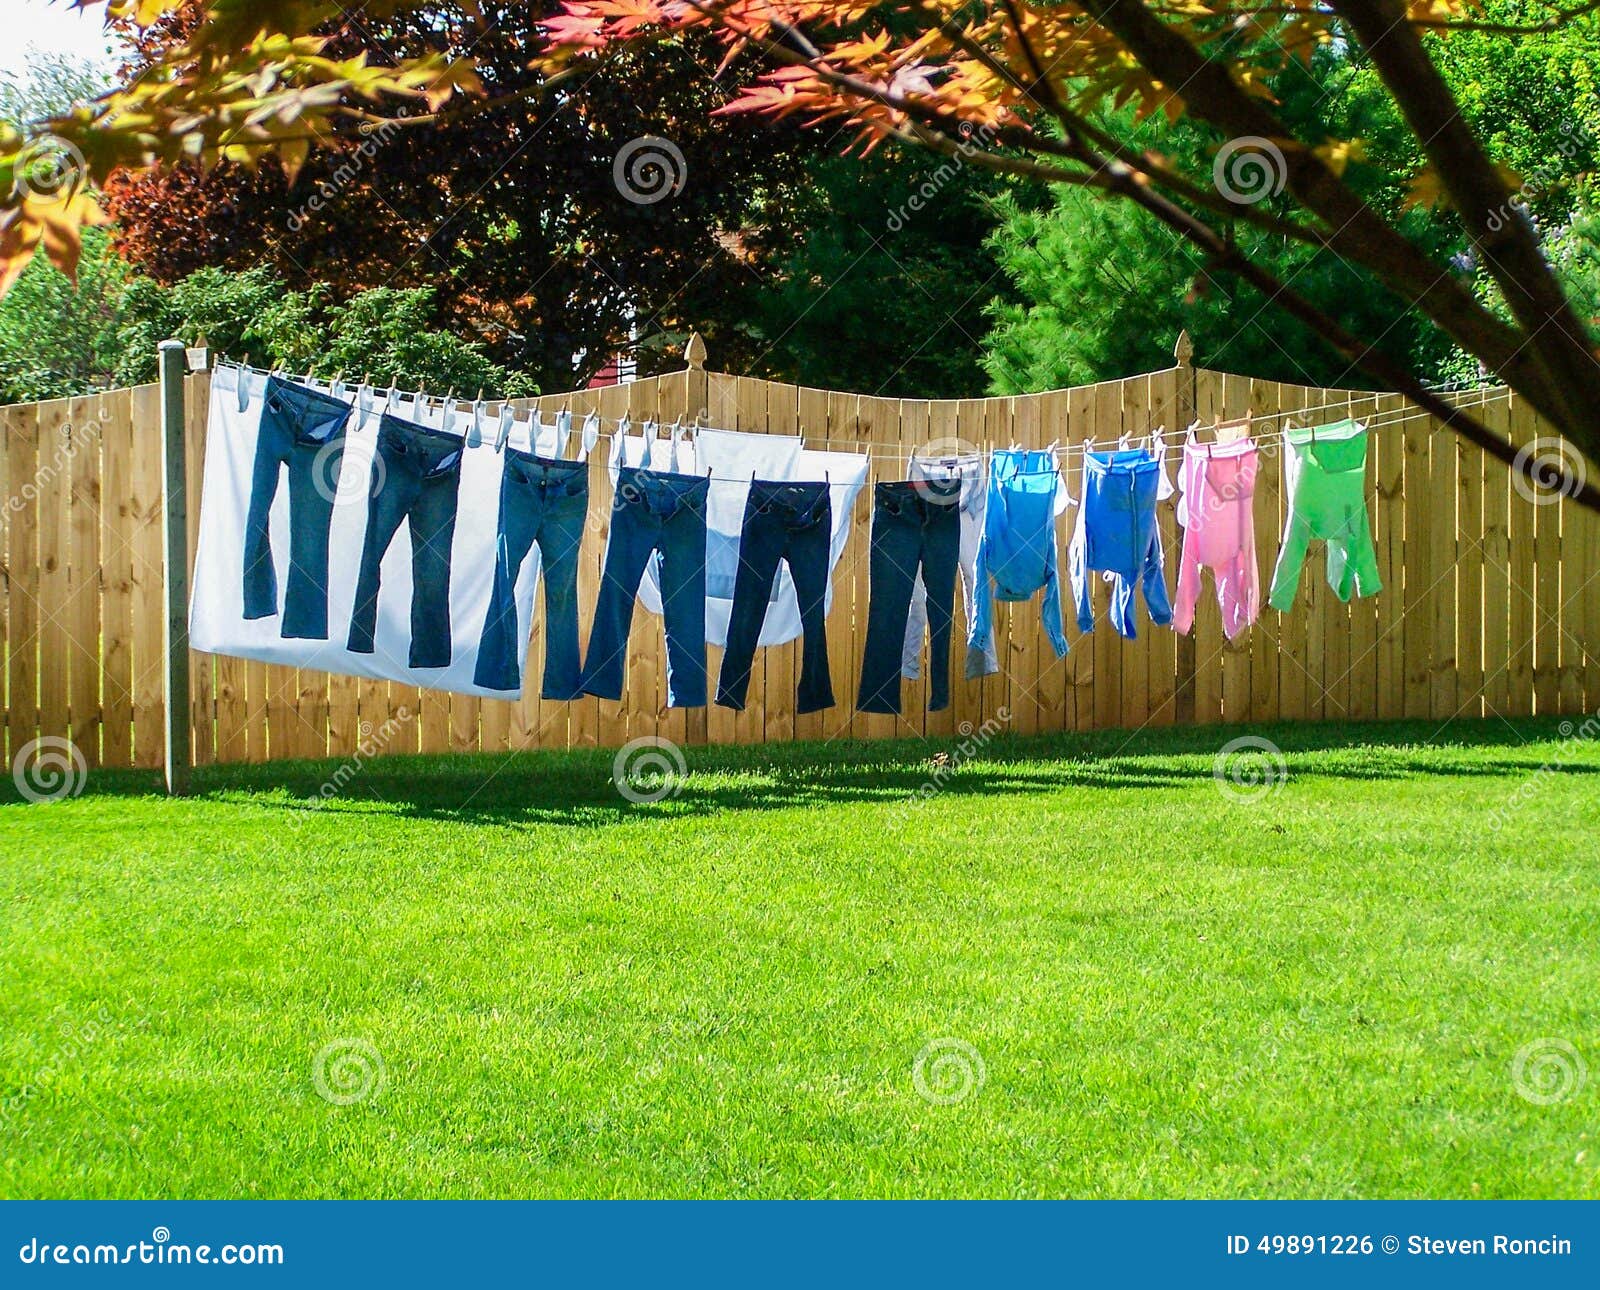 Sunny Summer Clothesline in Backyard Stock Photo - Image of highlight,  fencing: 49891226